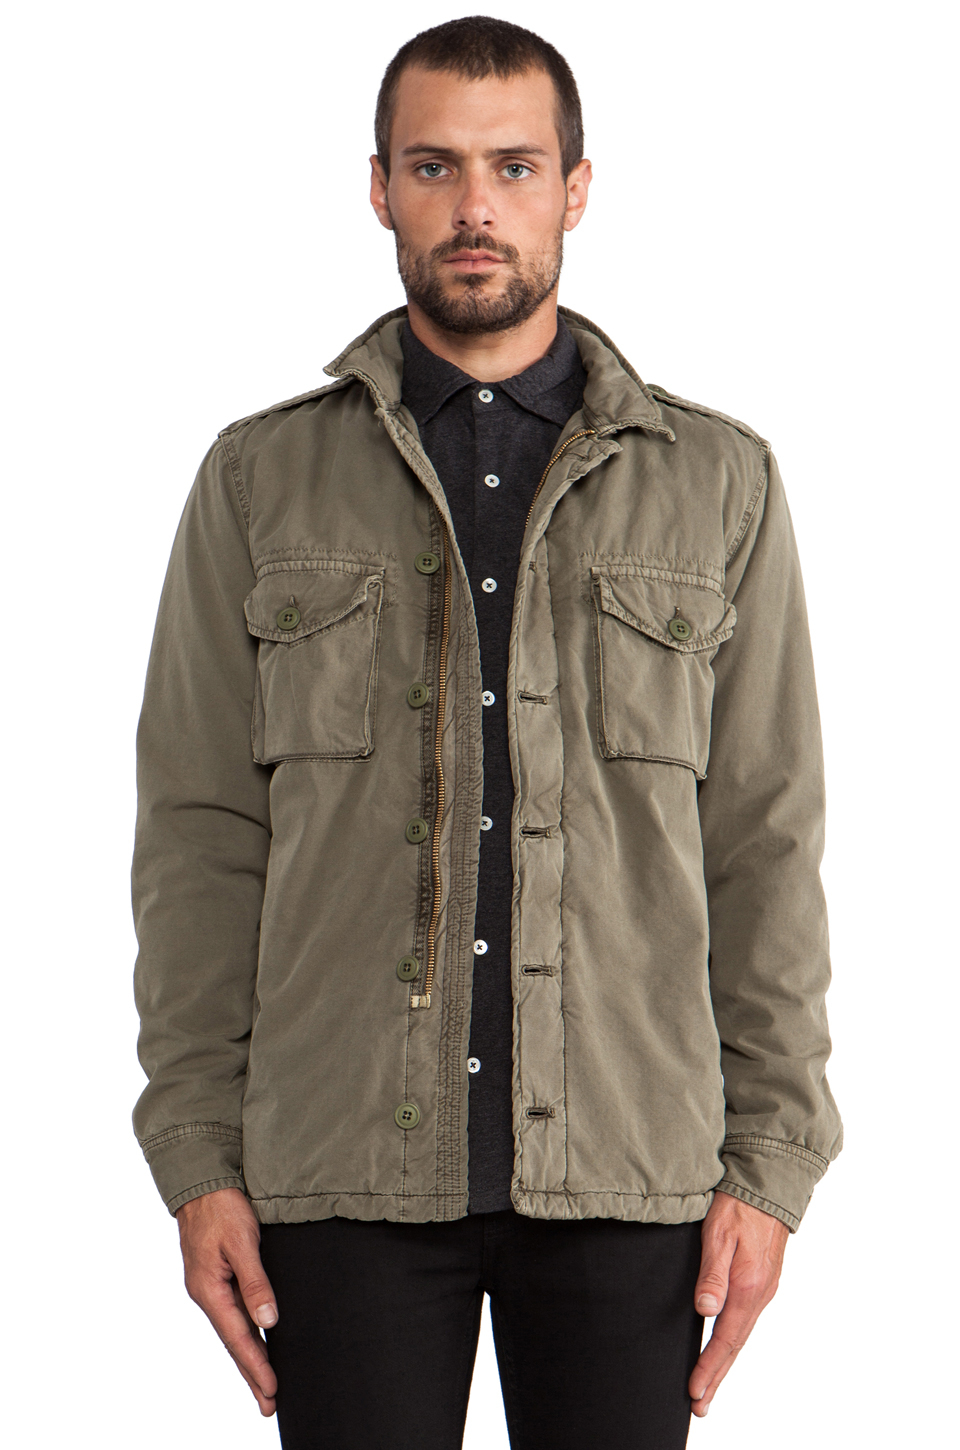 Hartford Army Jacket in Olive in Army Green (Green) for Men - Lyst